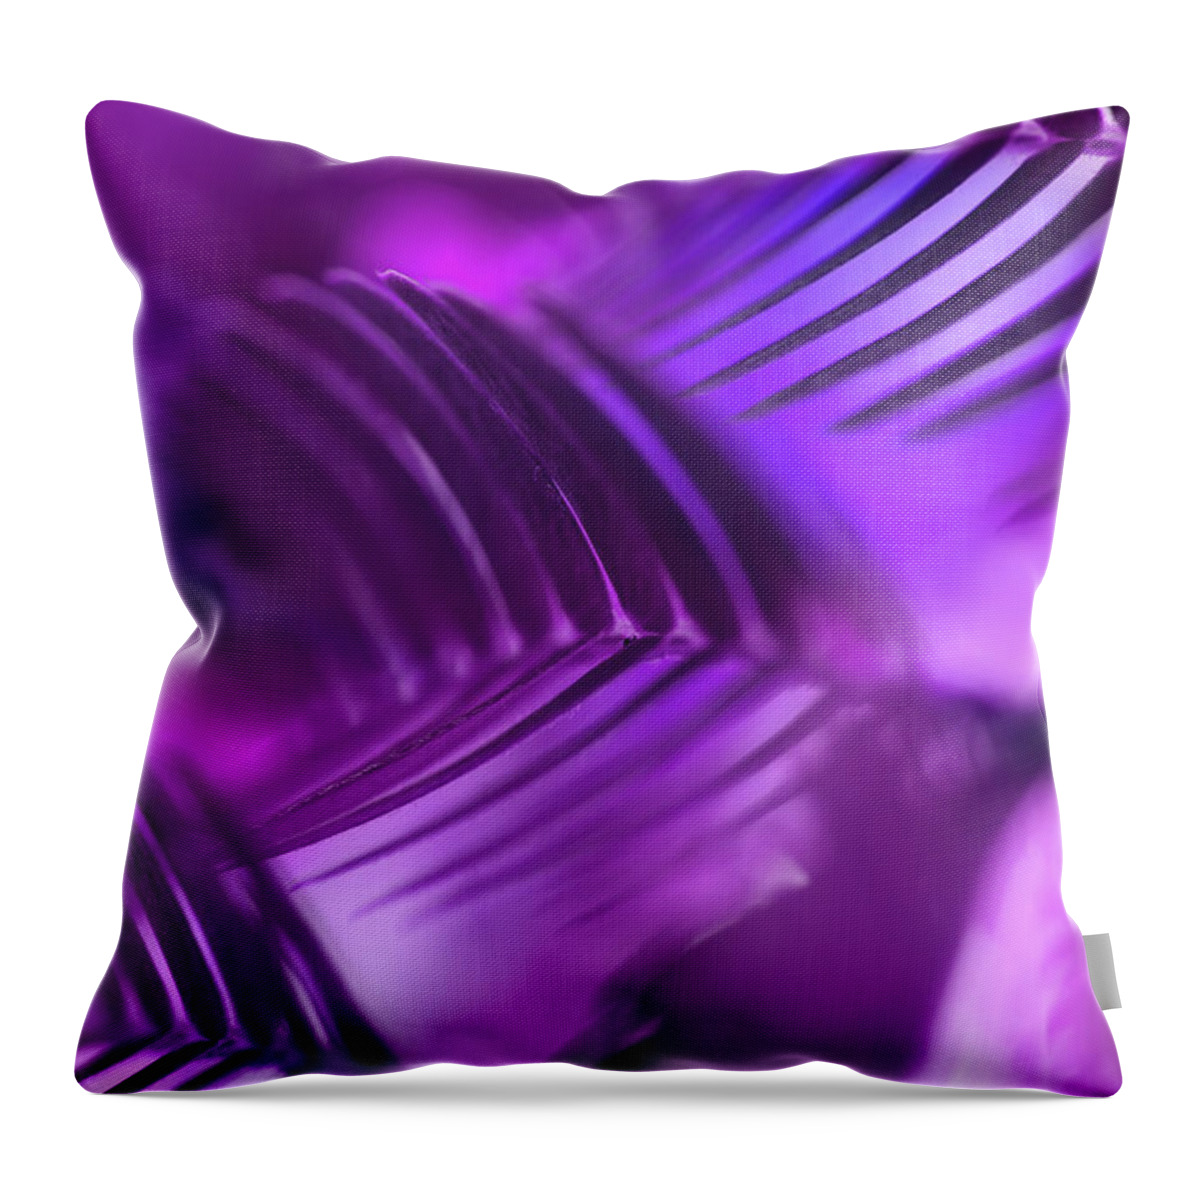 Mimosa Throw Pillow featuring the photograph Mimosa Leaf Abstract by Mike Eingle